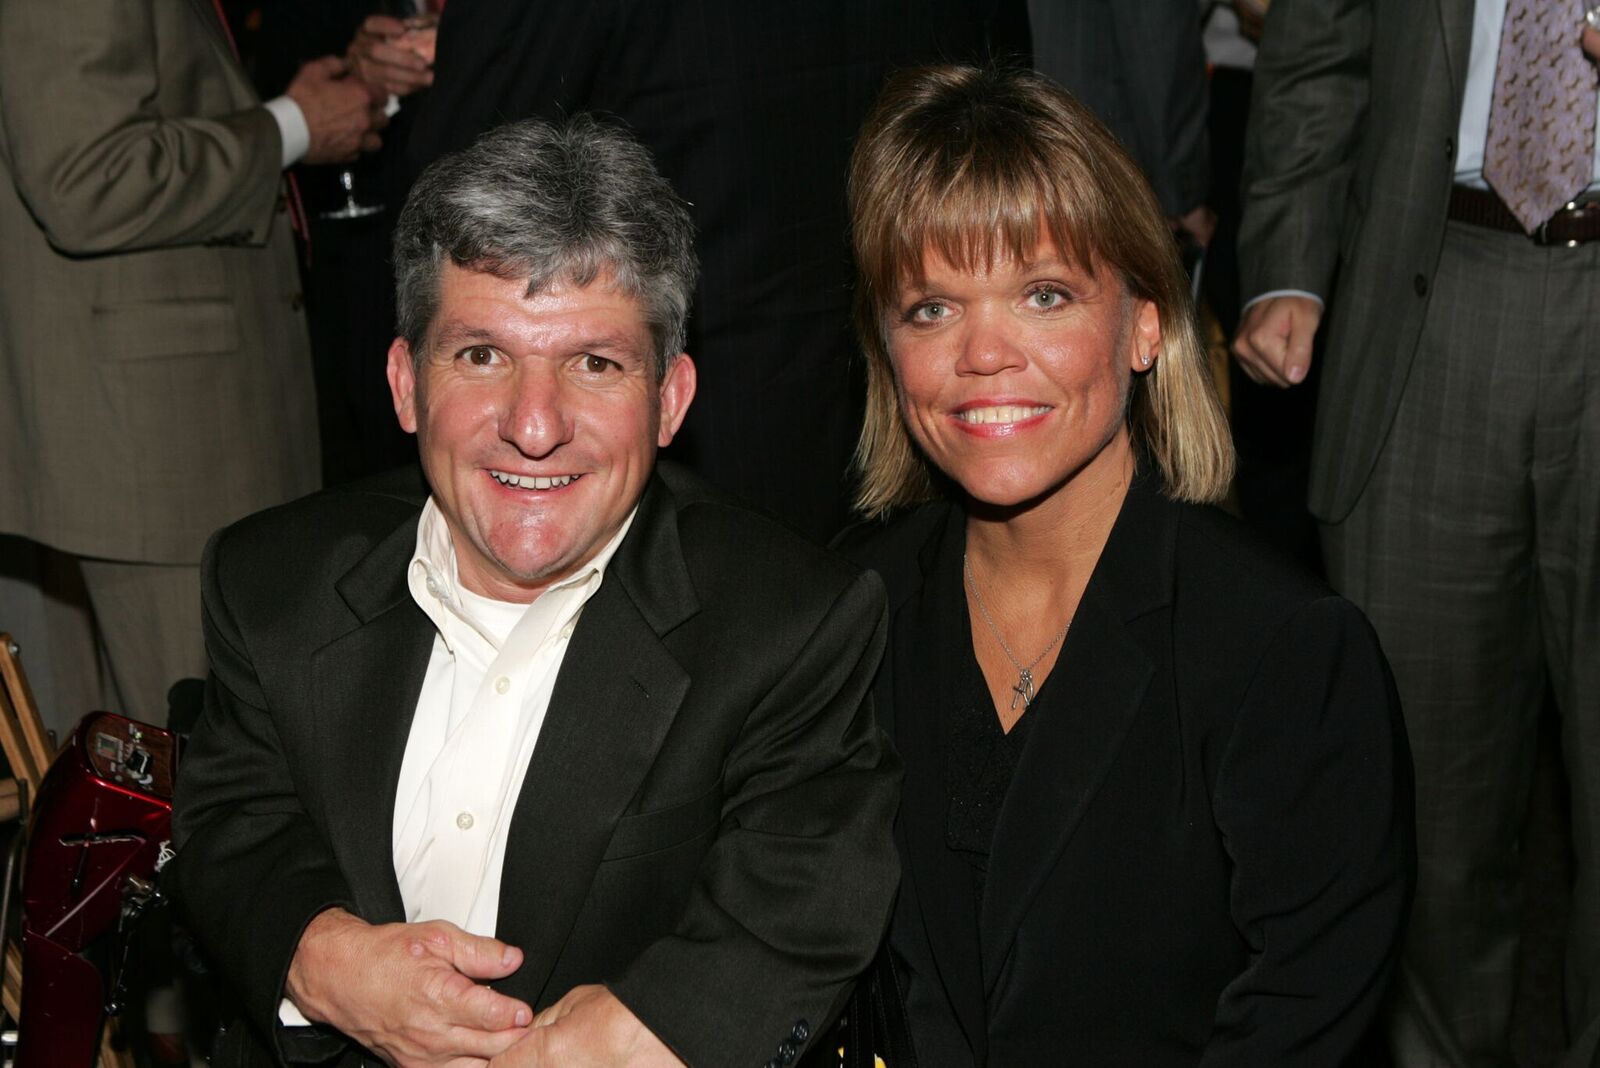 Matt and Amy Roloff attend the Discovery Upfront Presentation NY - Talent Images at the Frederick P. Rose Hall on April 23, 2008 in New York City | Photo: Getty Images